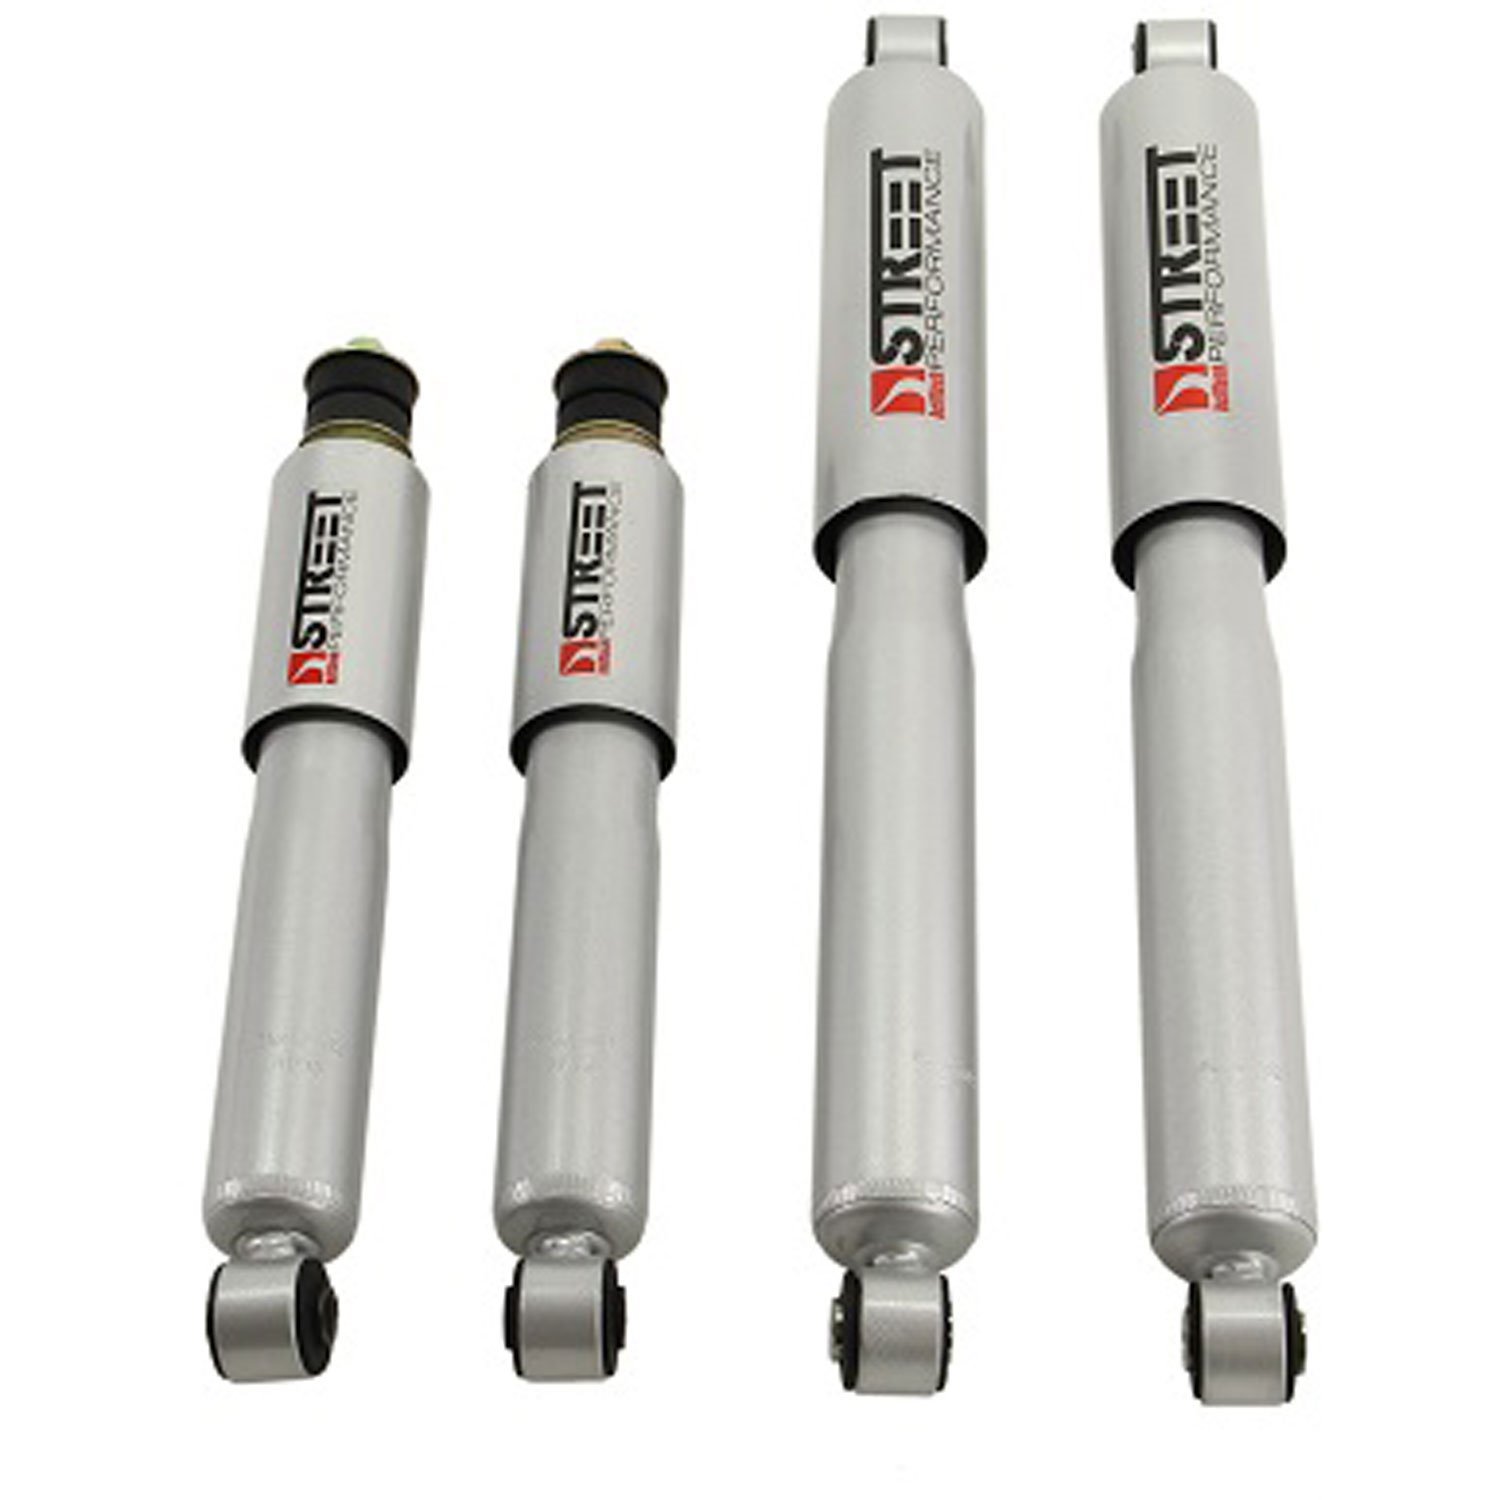 Street Performance Shock Set includes (2) 146-10104H Front Shocks and (2) 146-2216HE Rear Shocks